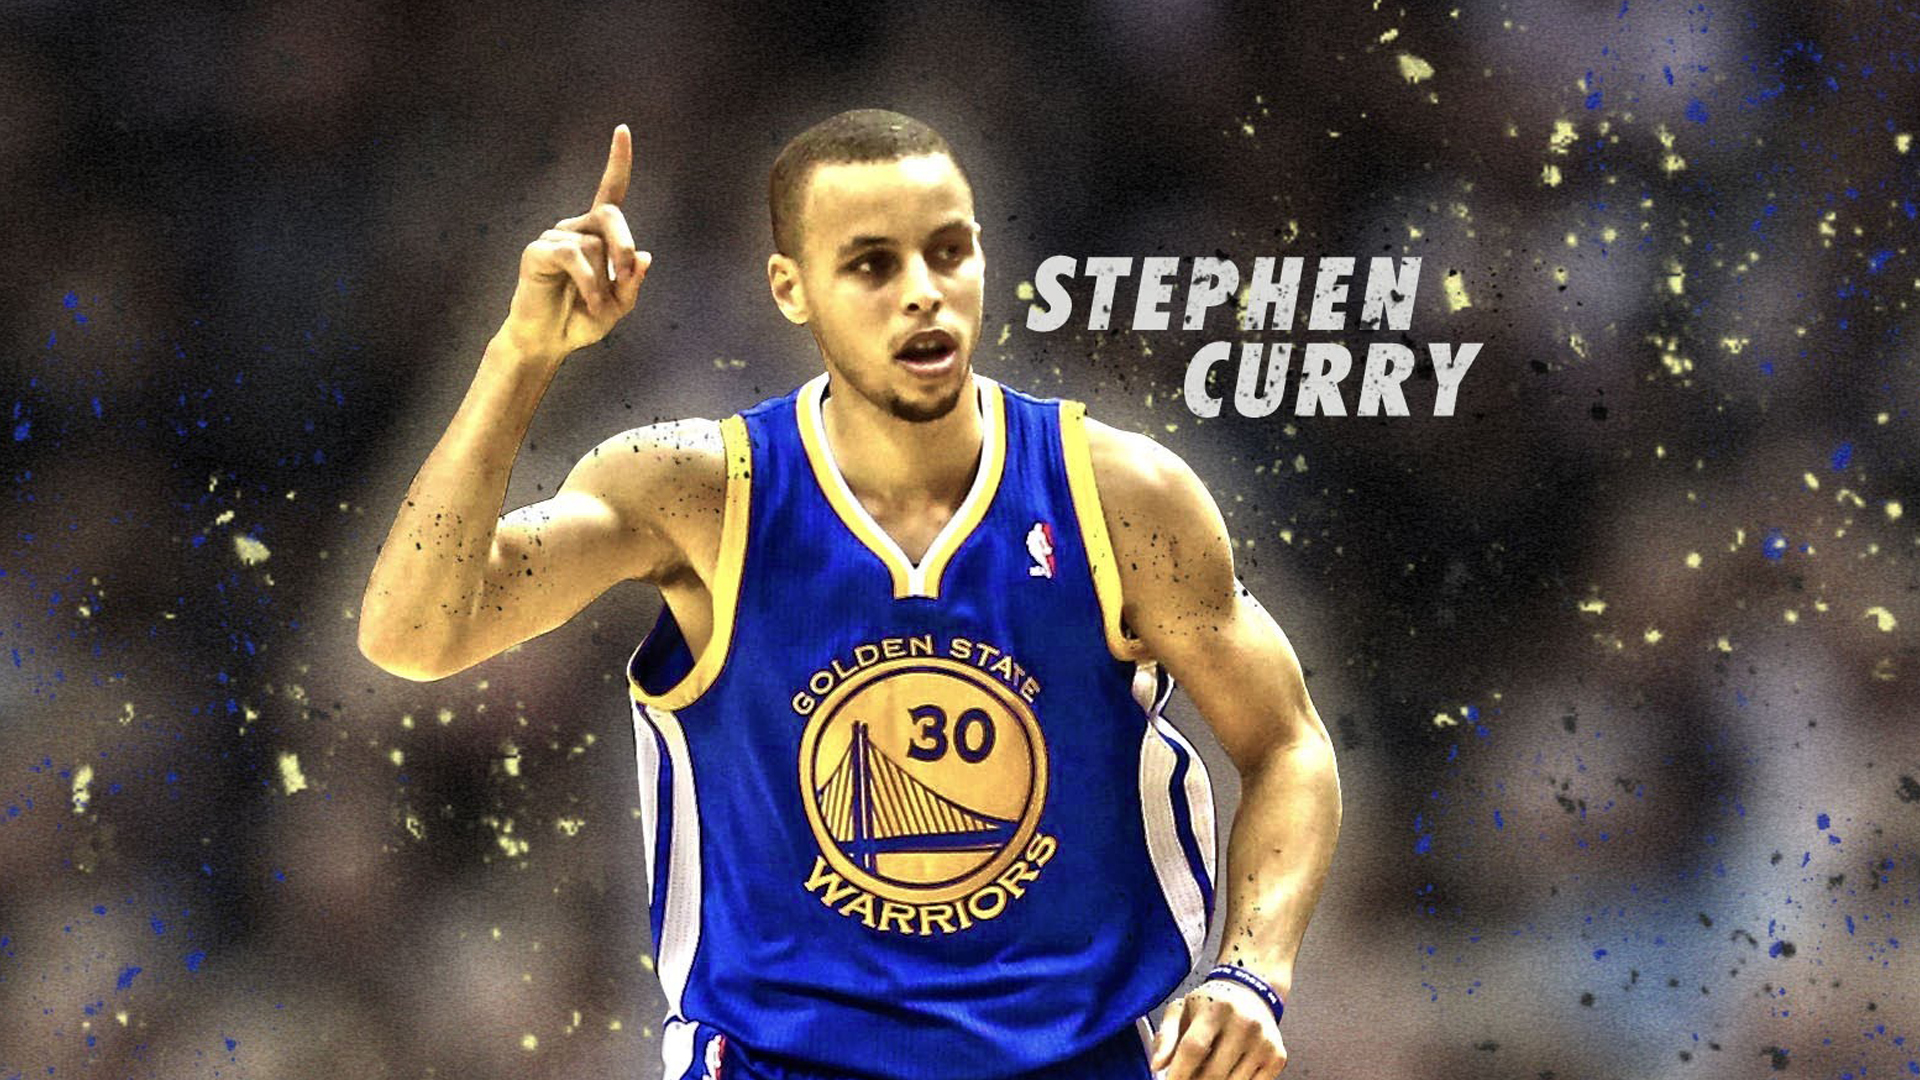 Steph Curry Wallpaper  NawPic